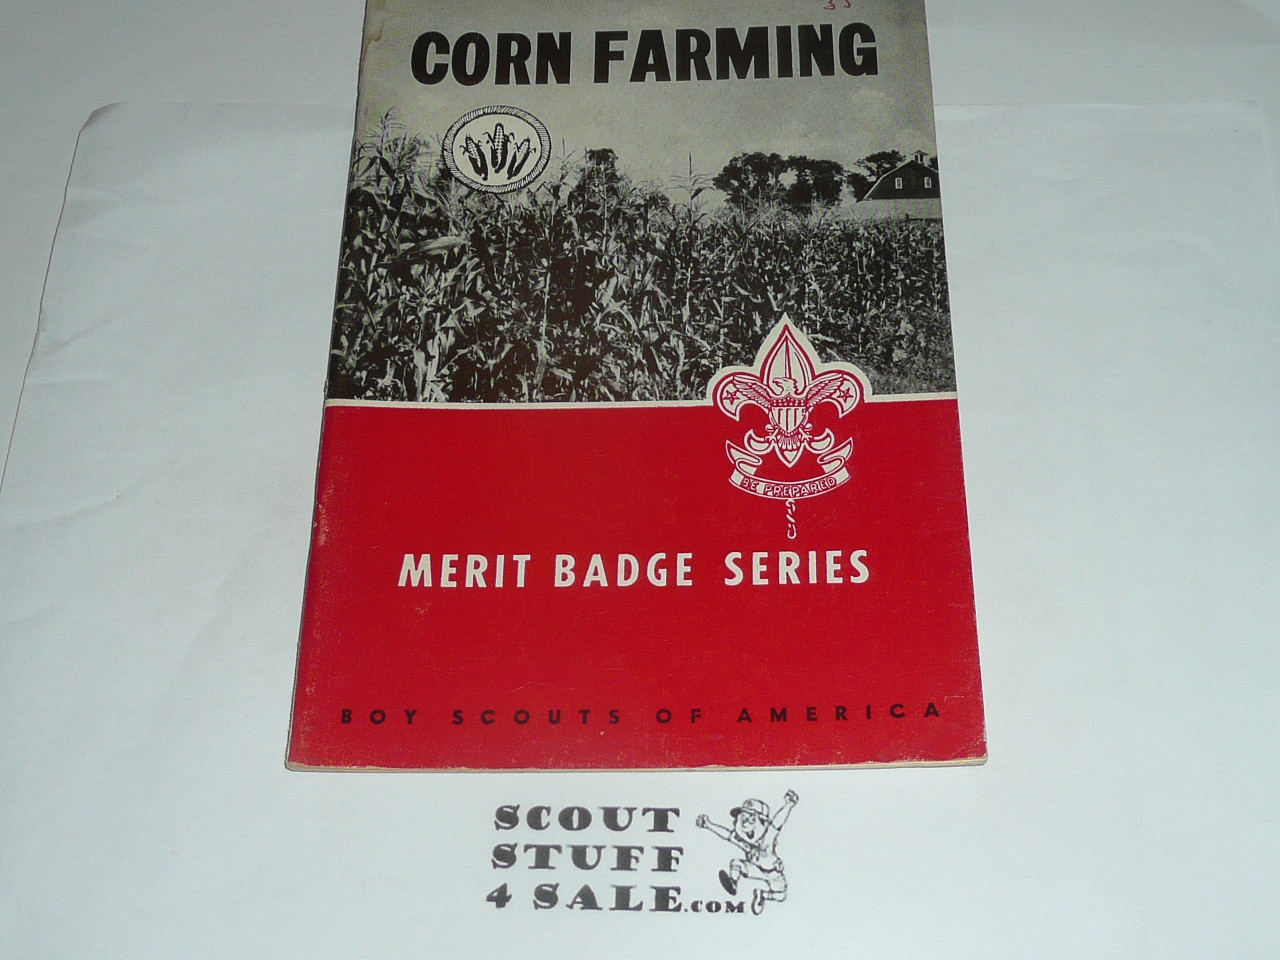 Corn Farming Merit Badge Pamphlet, Type 6, Picture Top Red Bottom Cover, 12-63 Printing